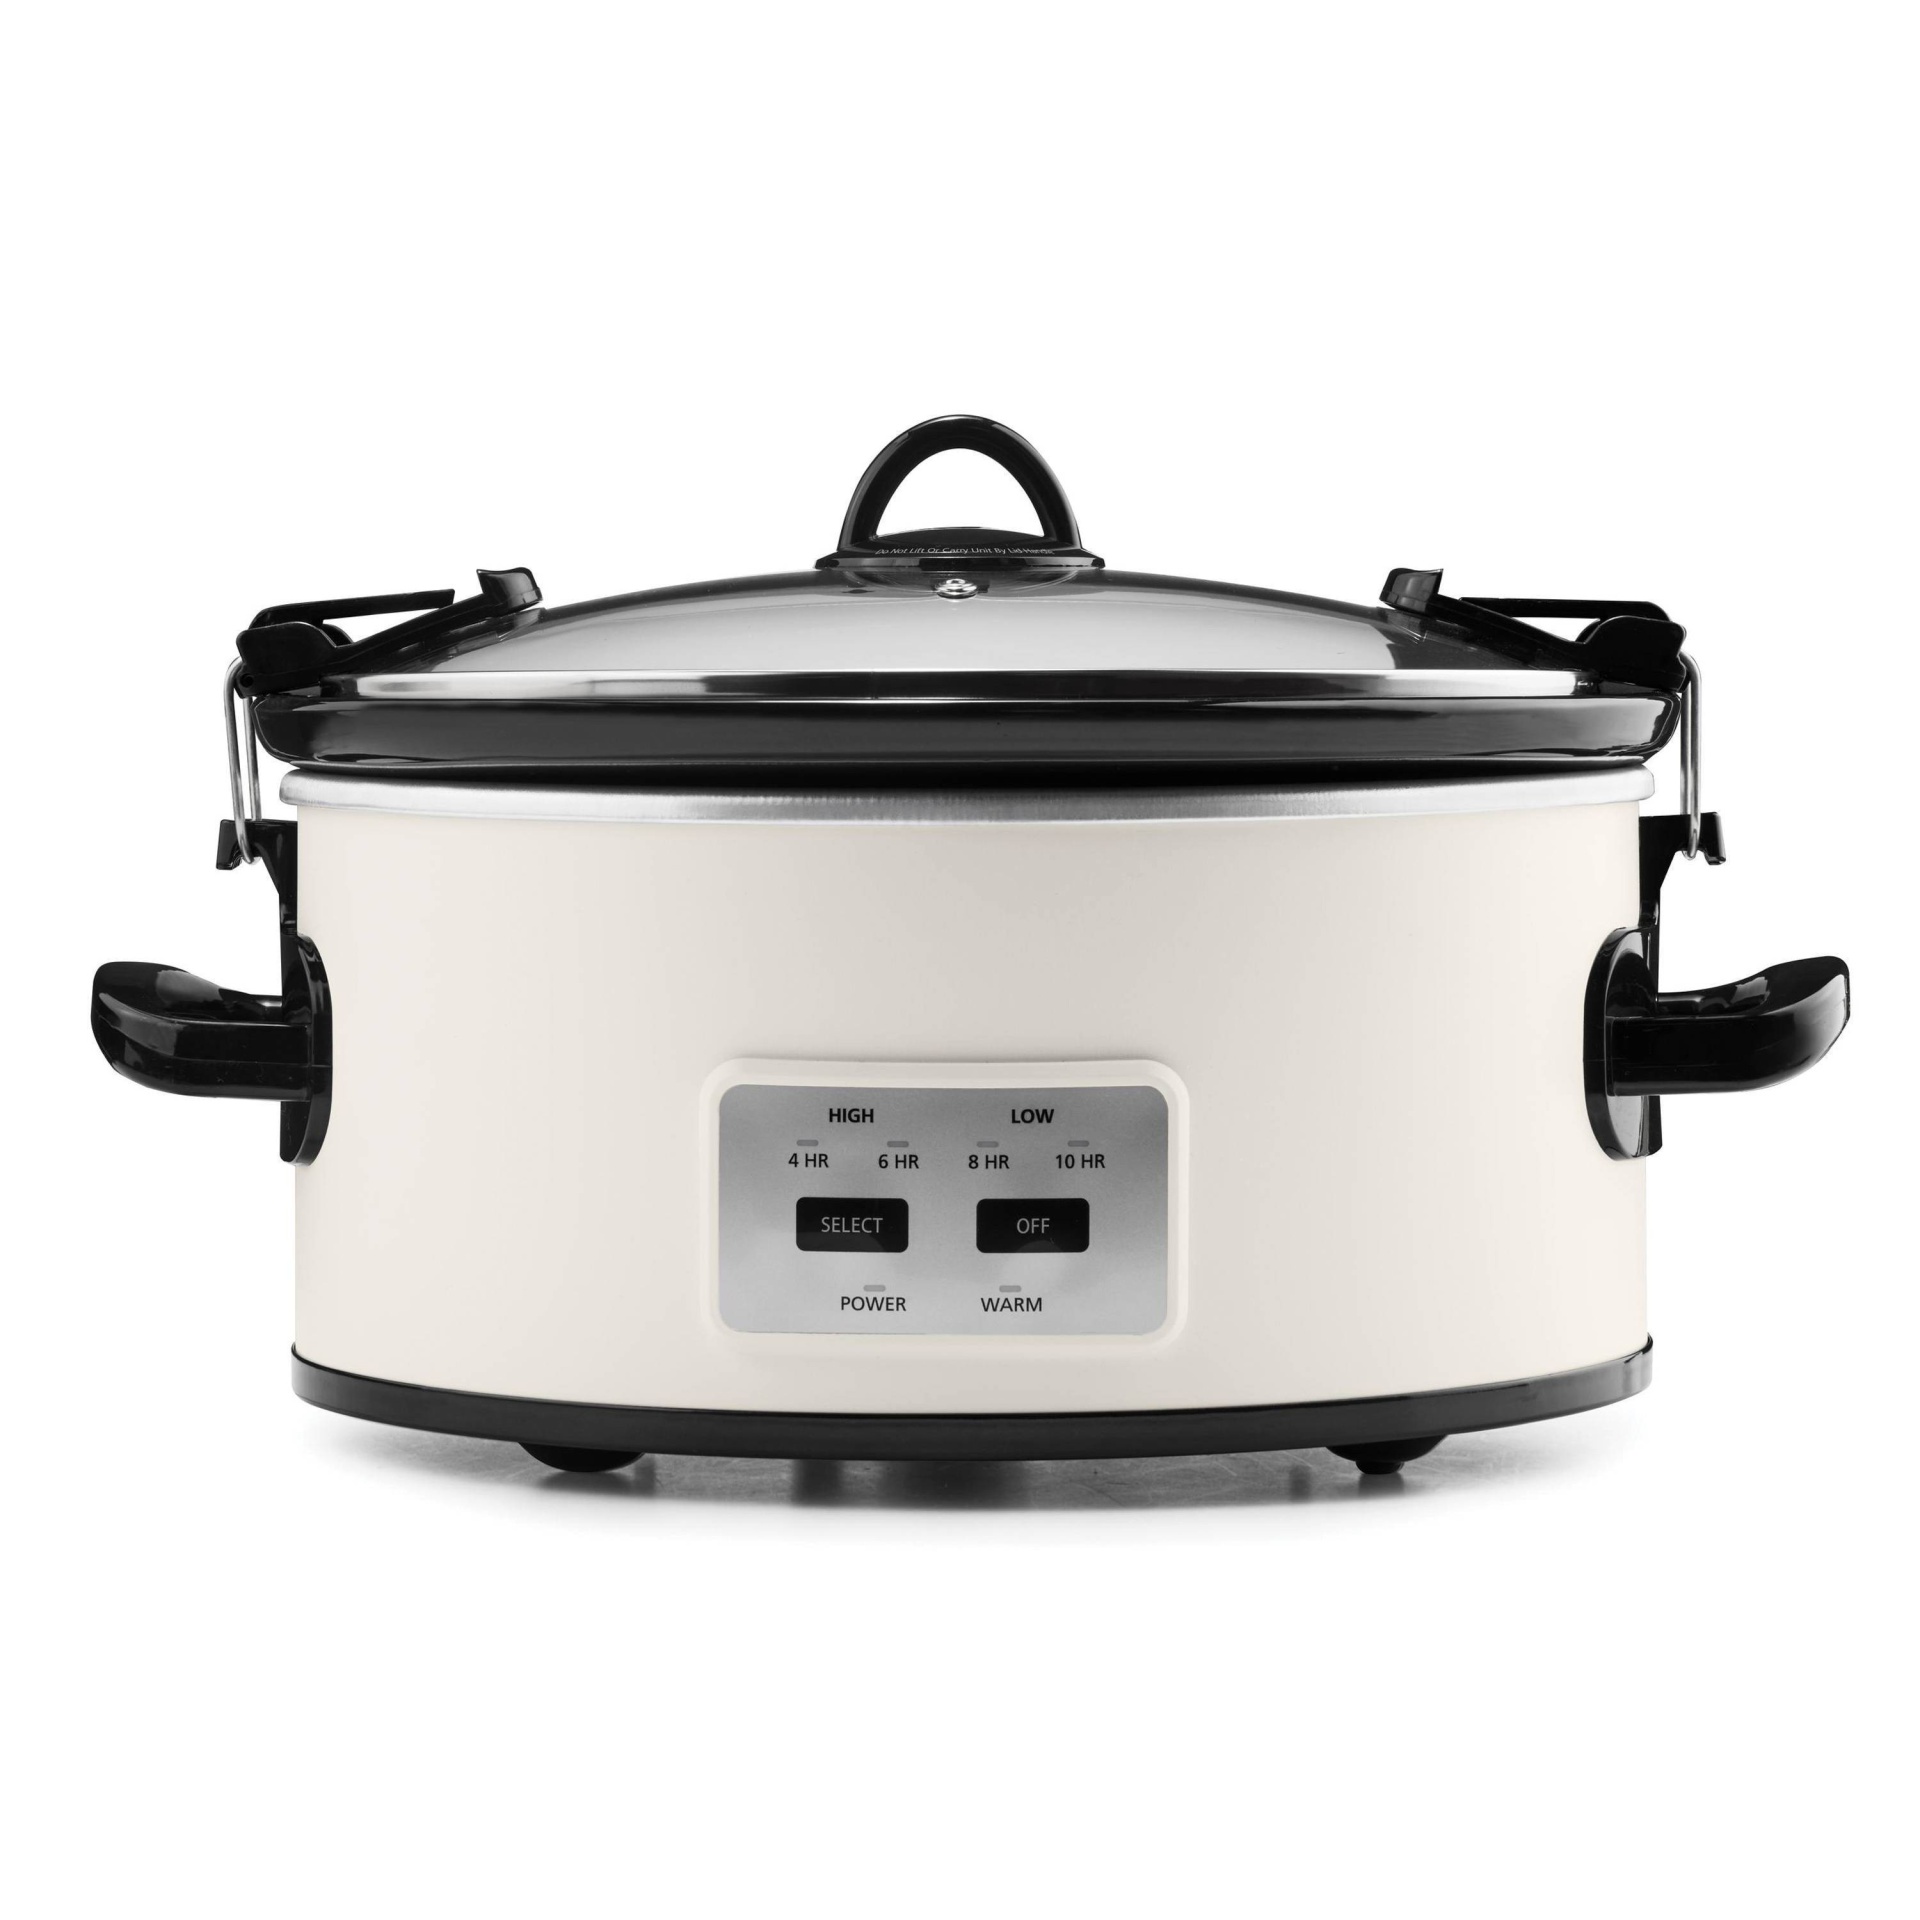 Crock-Pot Crock Pot Cook and Carry Programmable Slow Cooker - Hearth & Hand  with Magnolia 6 qt